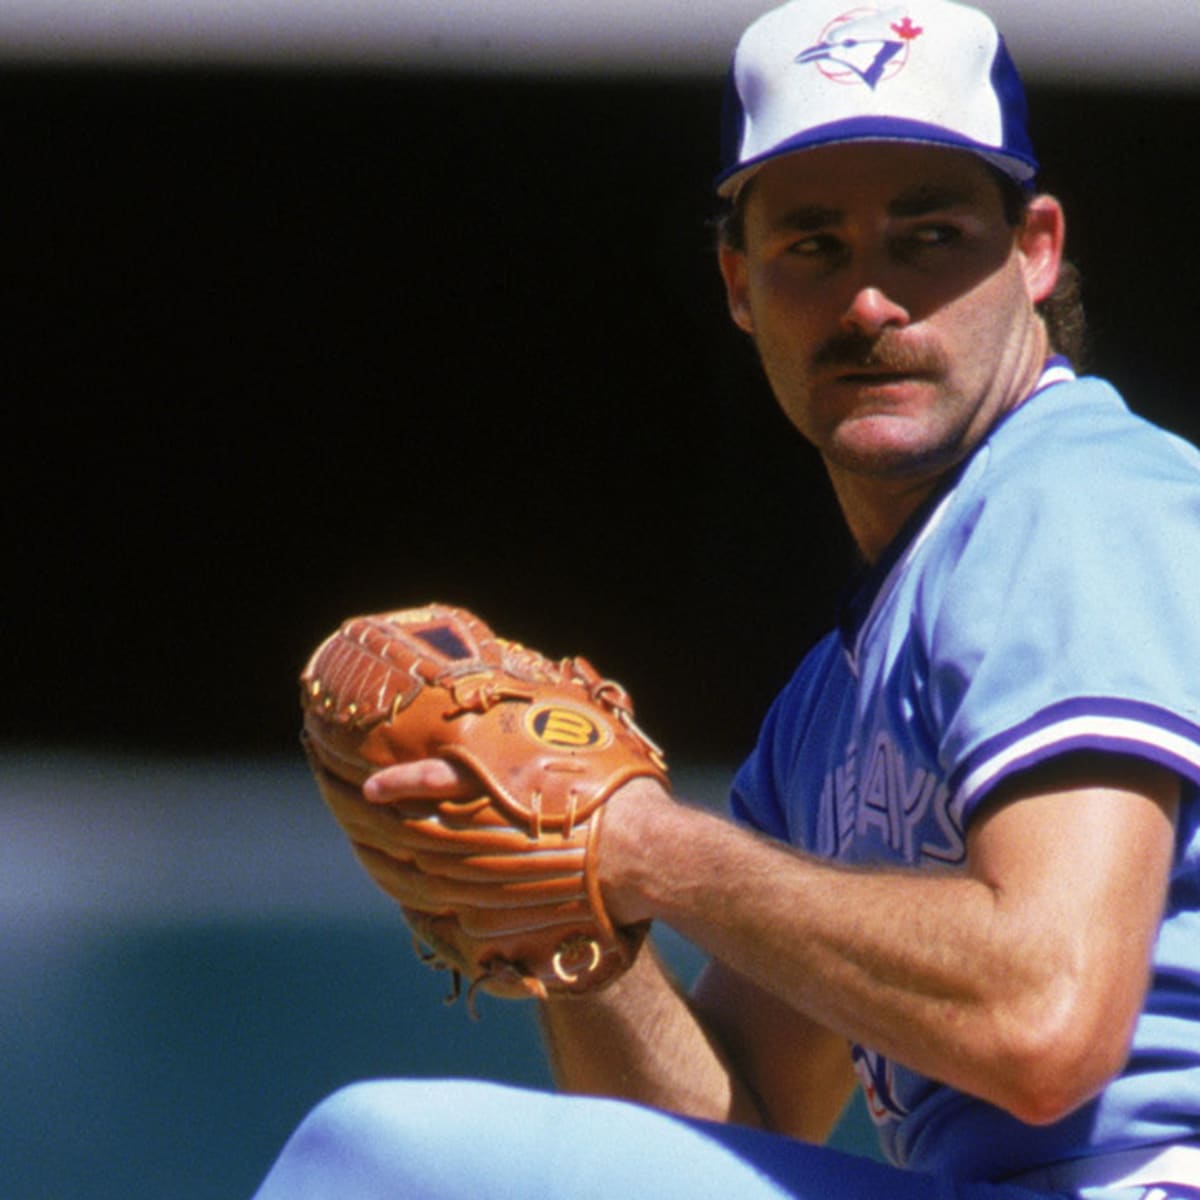 Blue Jays should retire jersey of Dave Stieb - Sports Illustrated